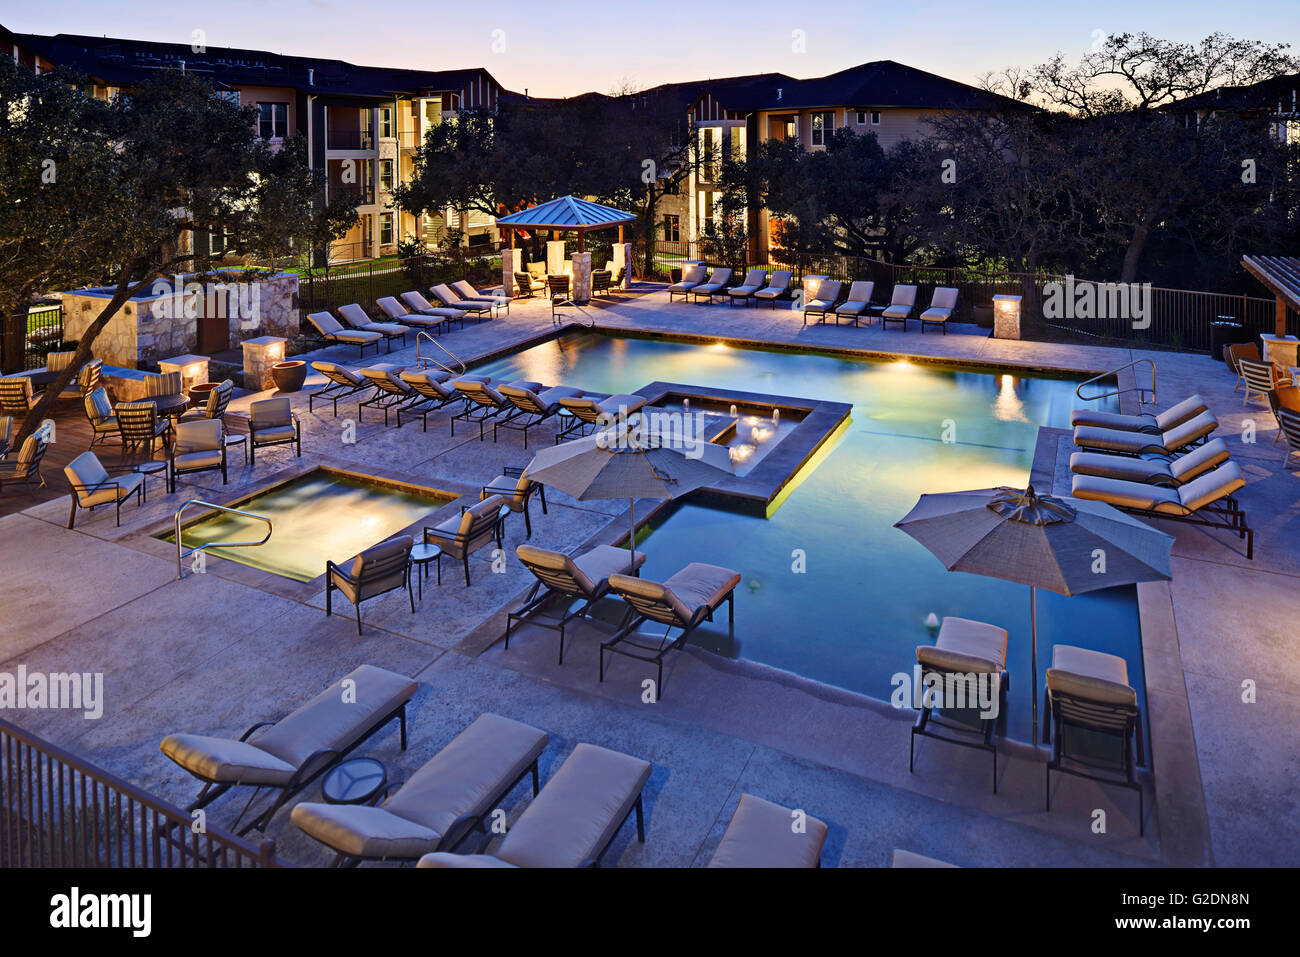 Apartment Complex Swimming Pool at Dusk Stock Photo